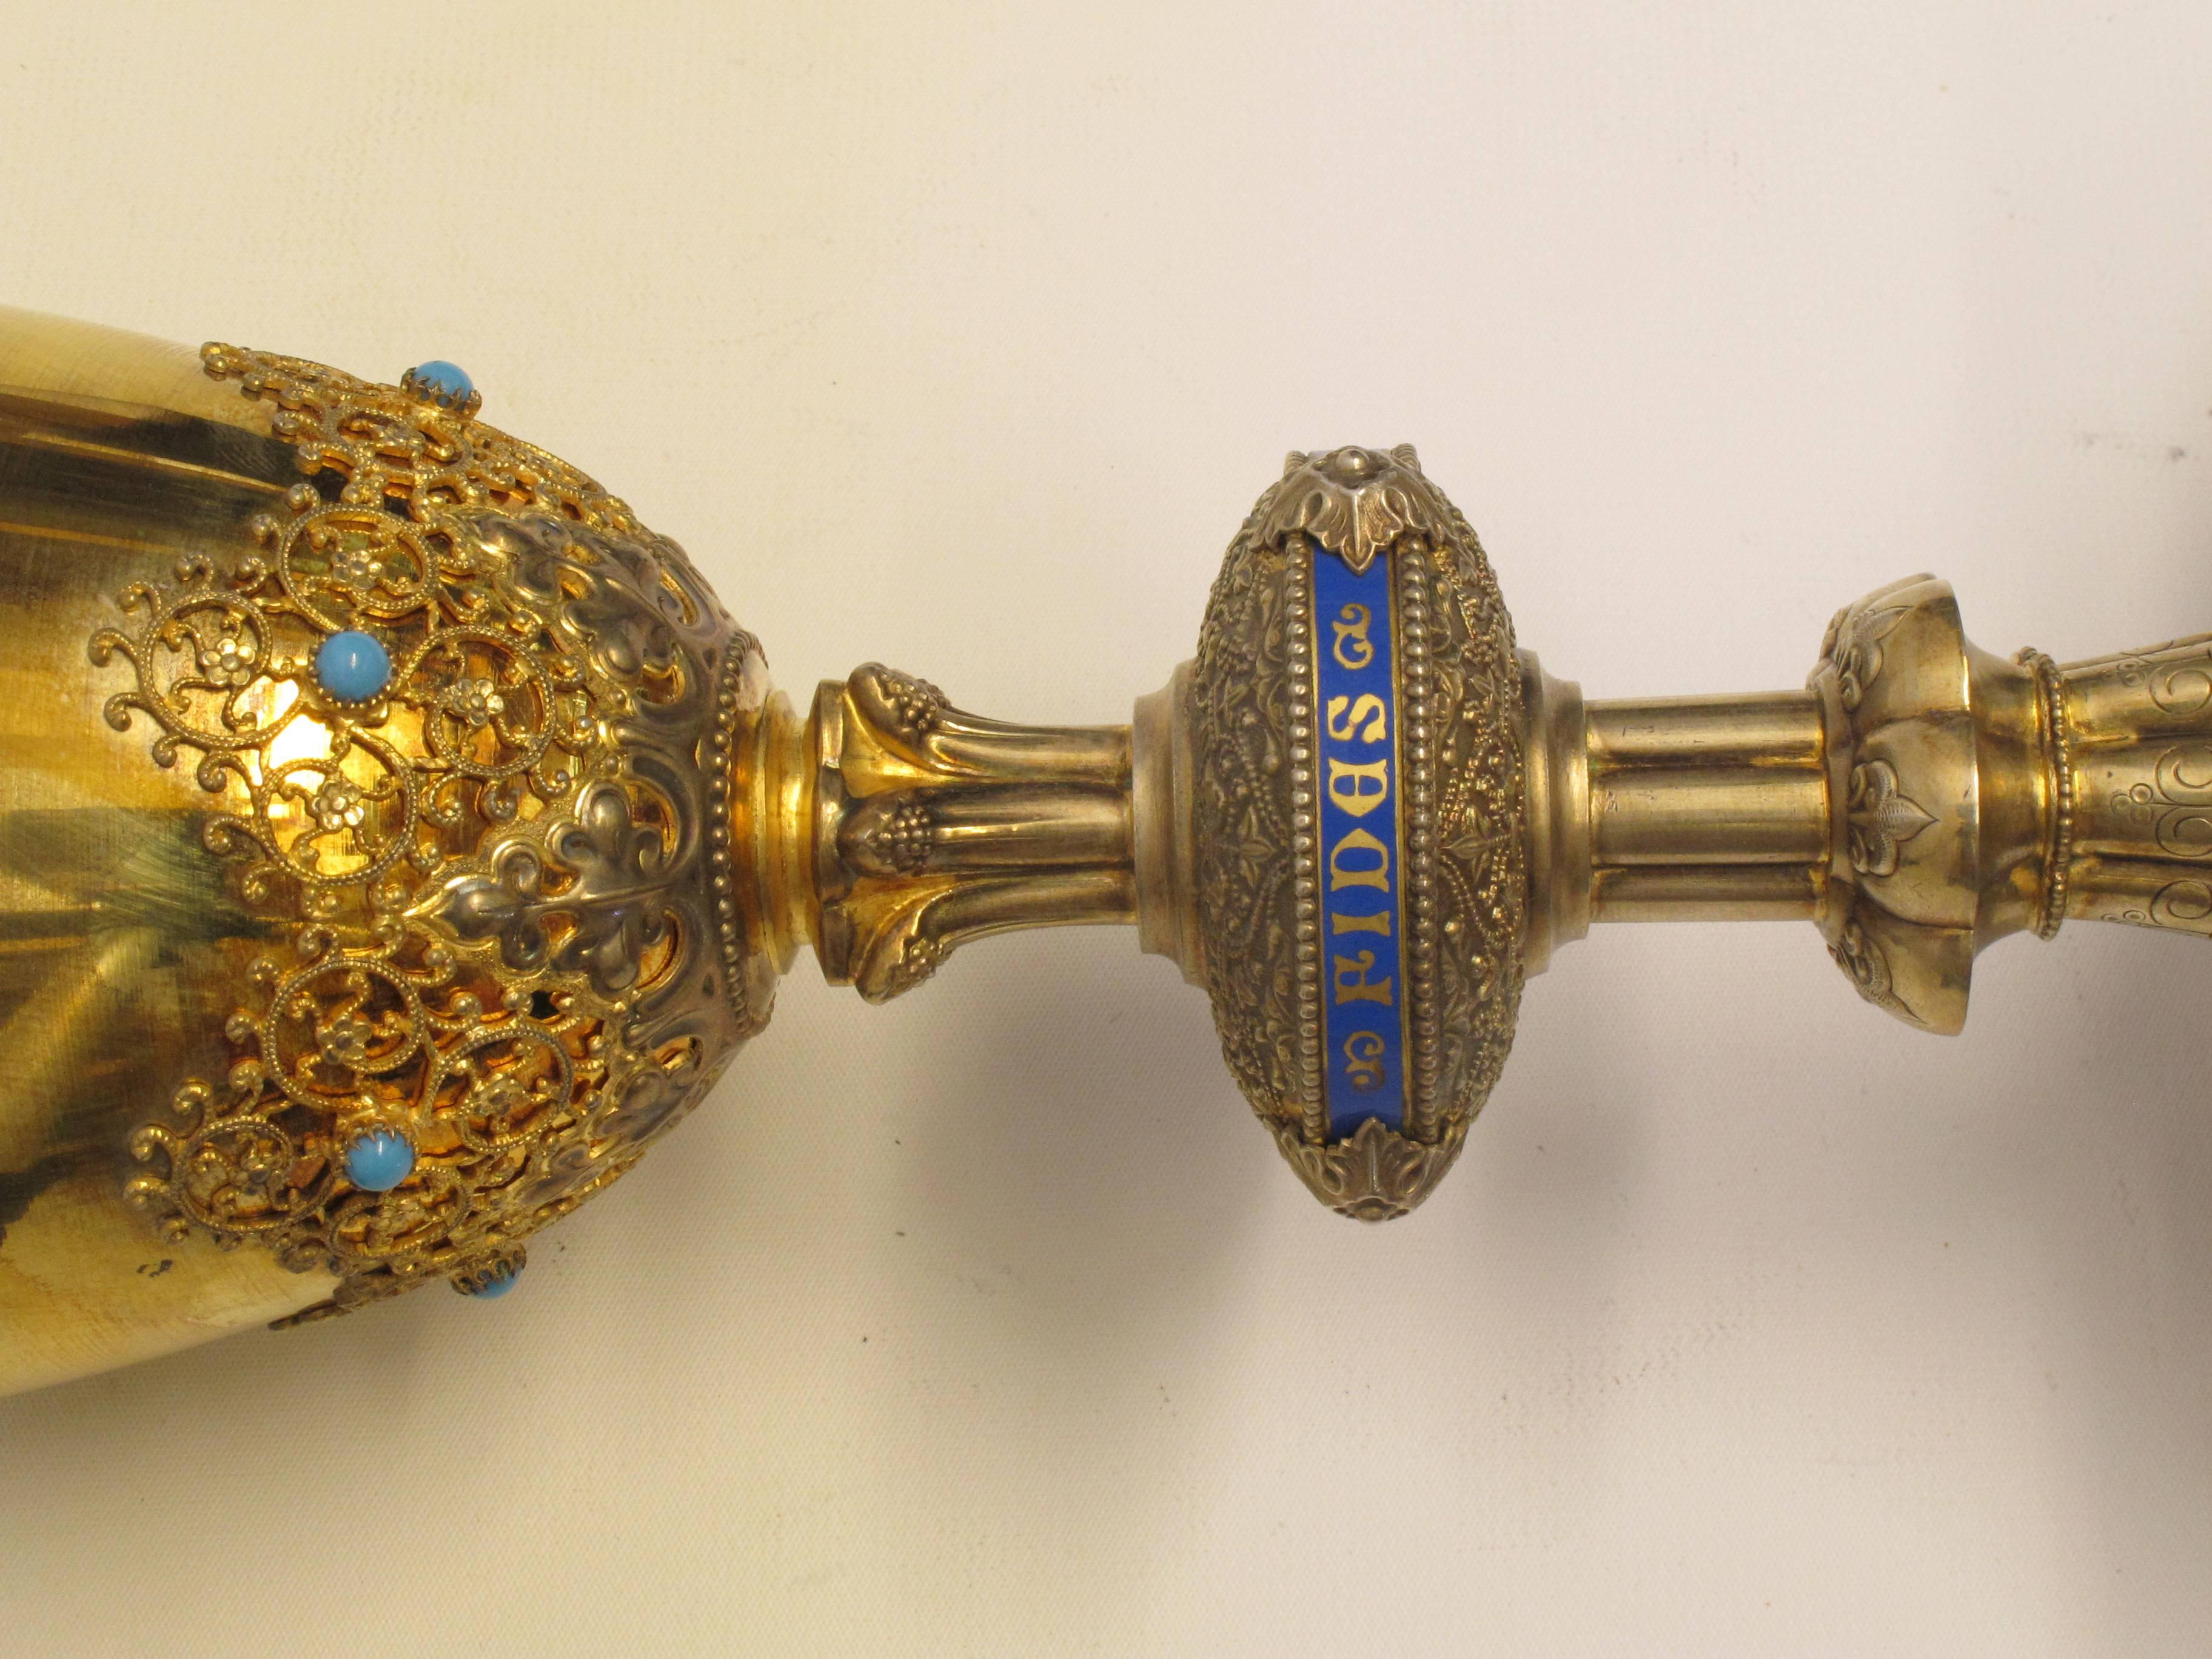 19th Century French Gilt Silver, Enamel, and Turquoise Chalice and Paten For Sale 2